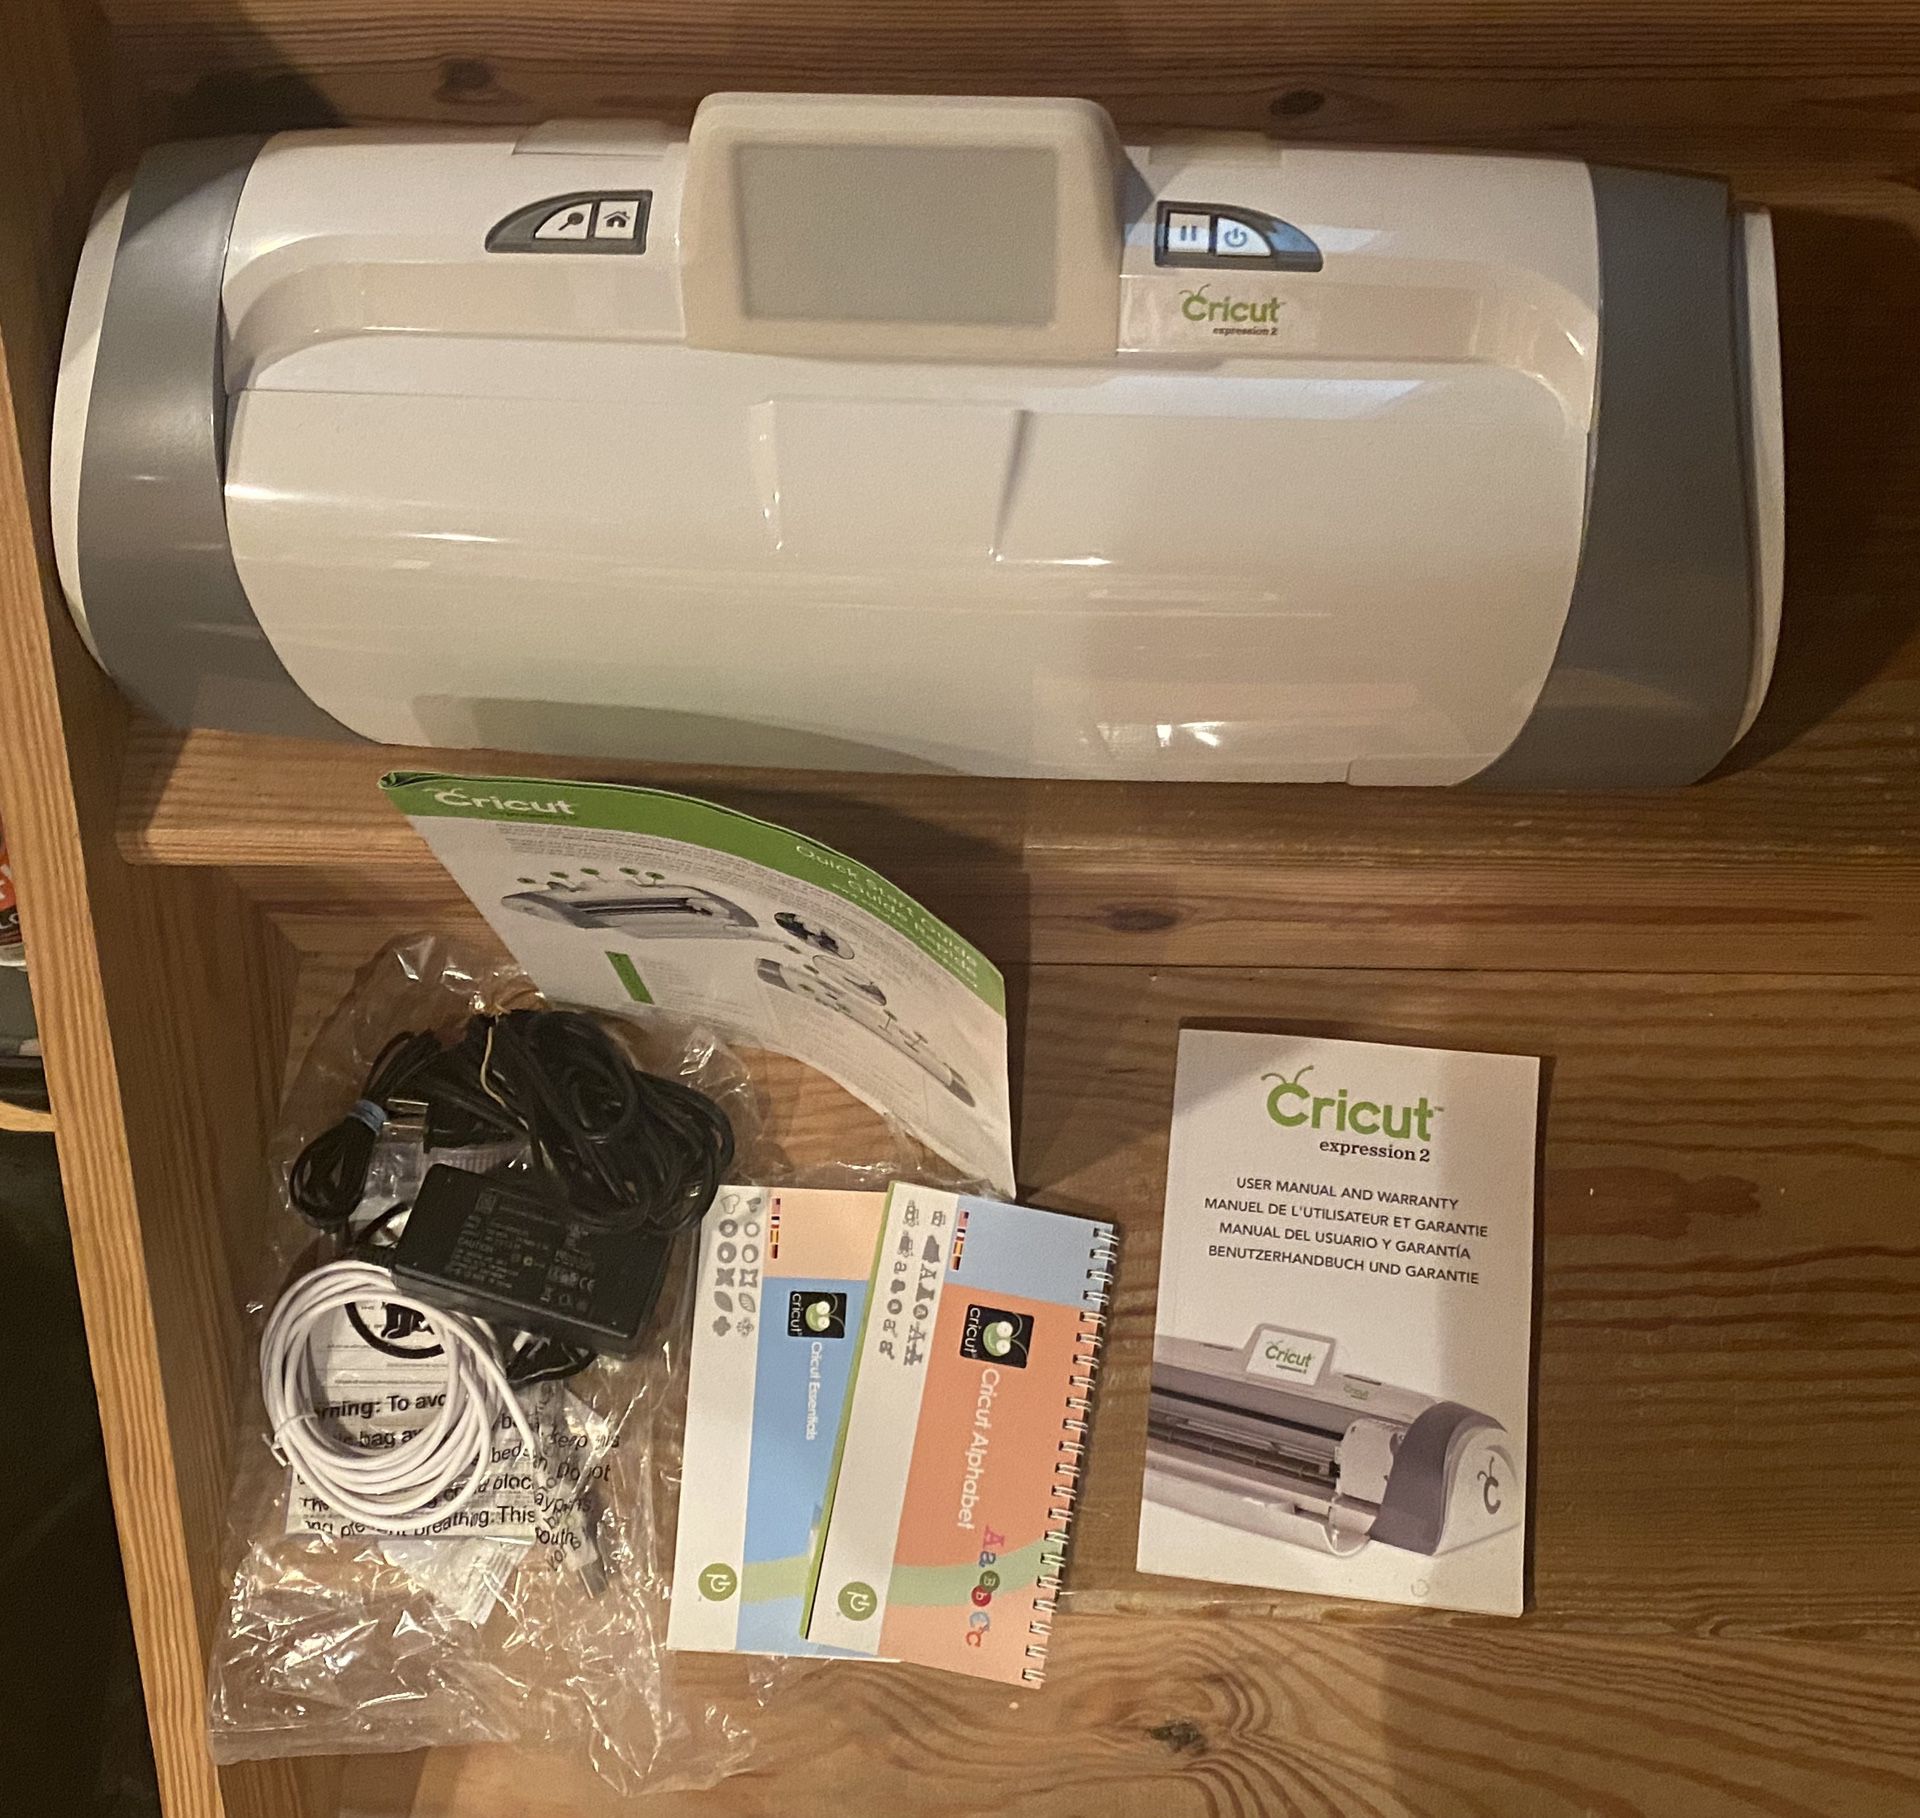 Cricut Expression 2 for Sale in East Stroudsburg, PA - OfferUp